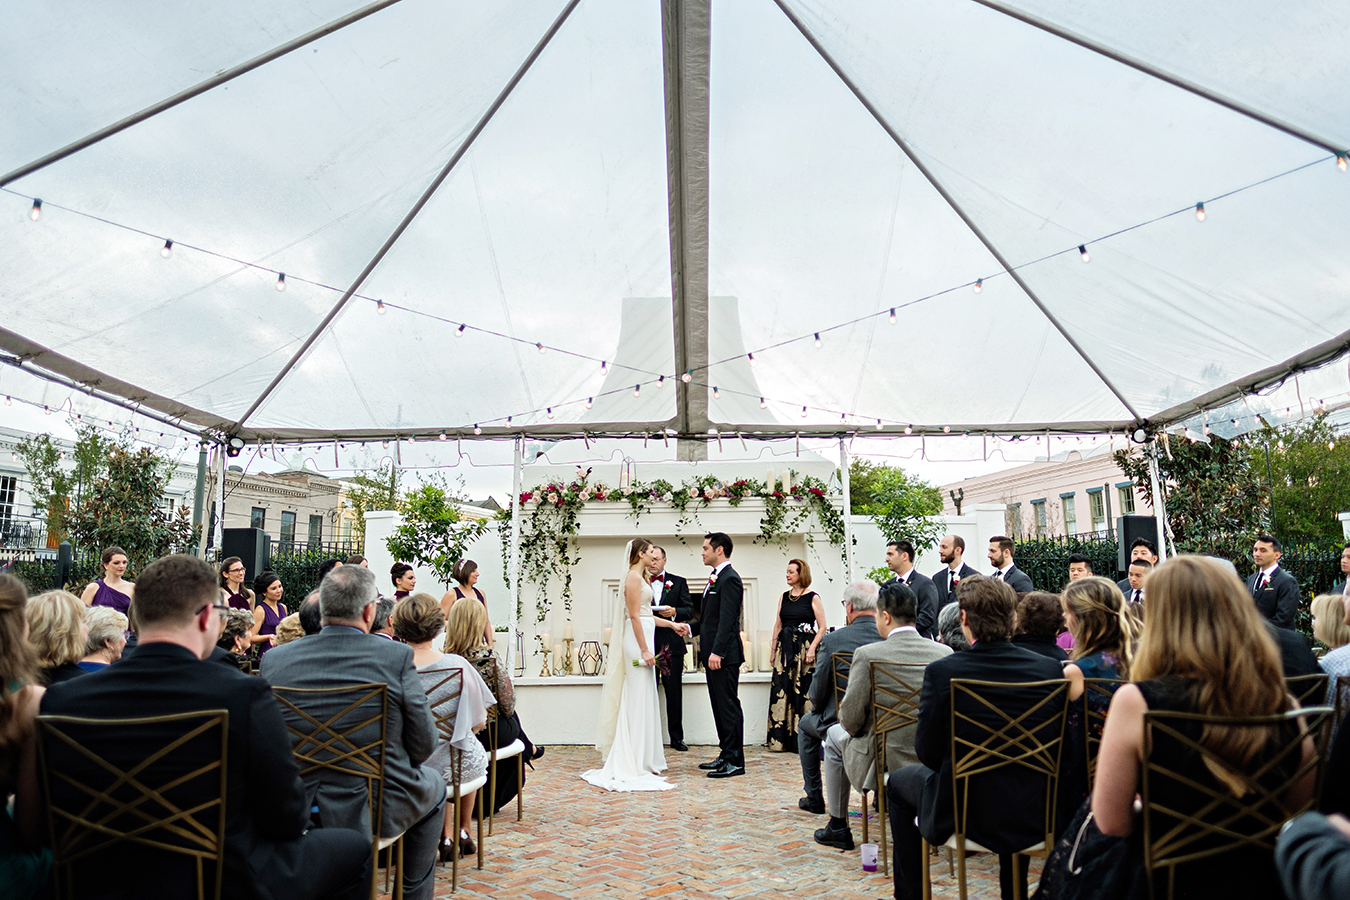 The wedding ceremony took place in Il Mercato's courtyard under a clear tent.